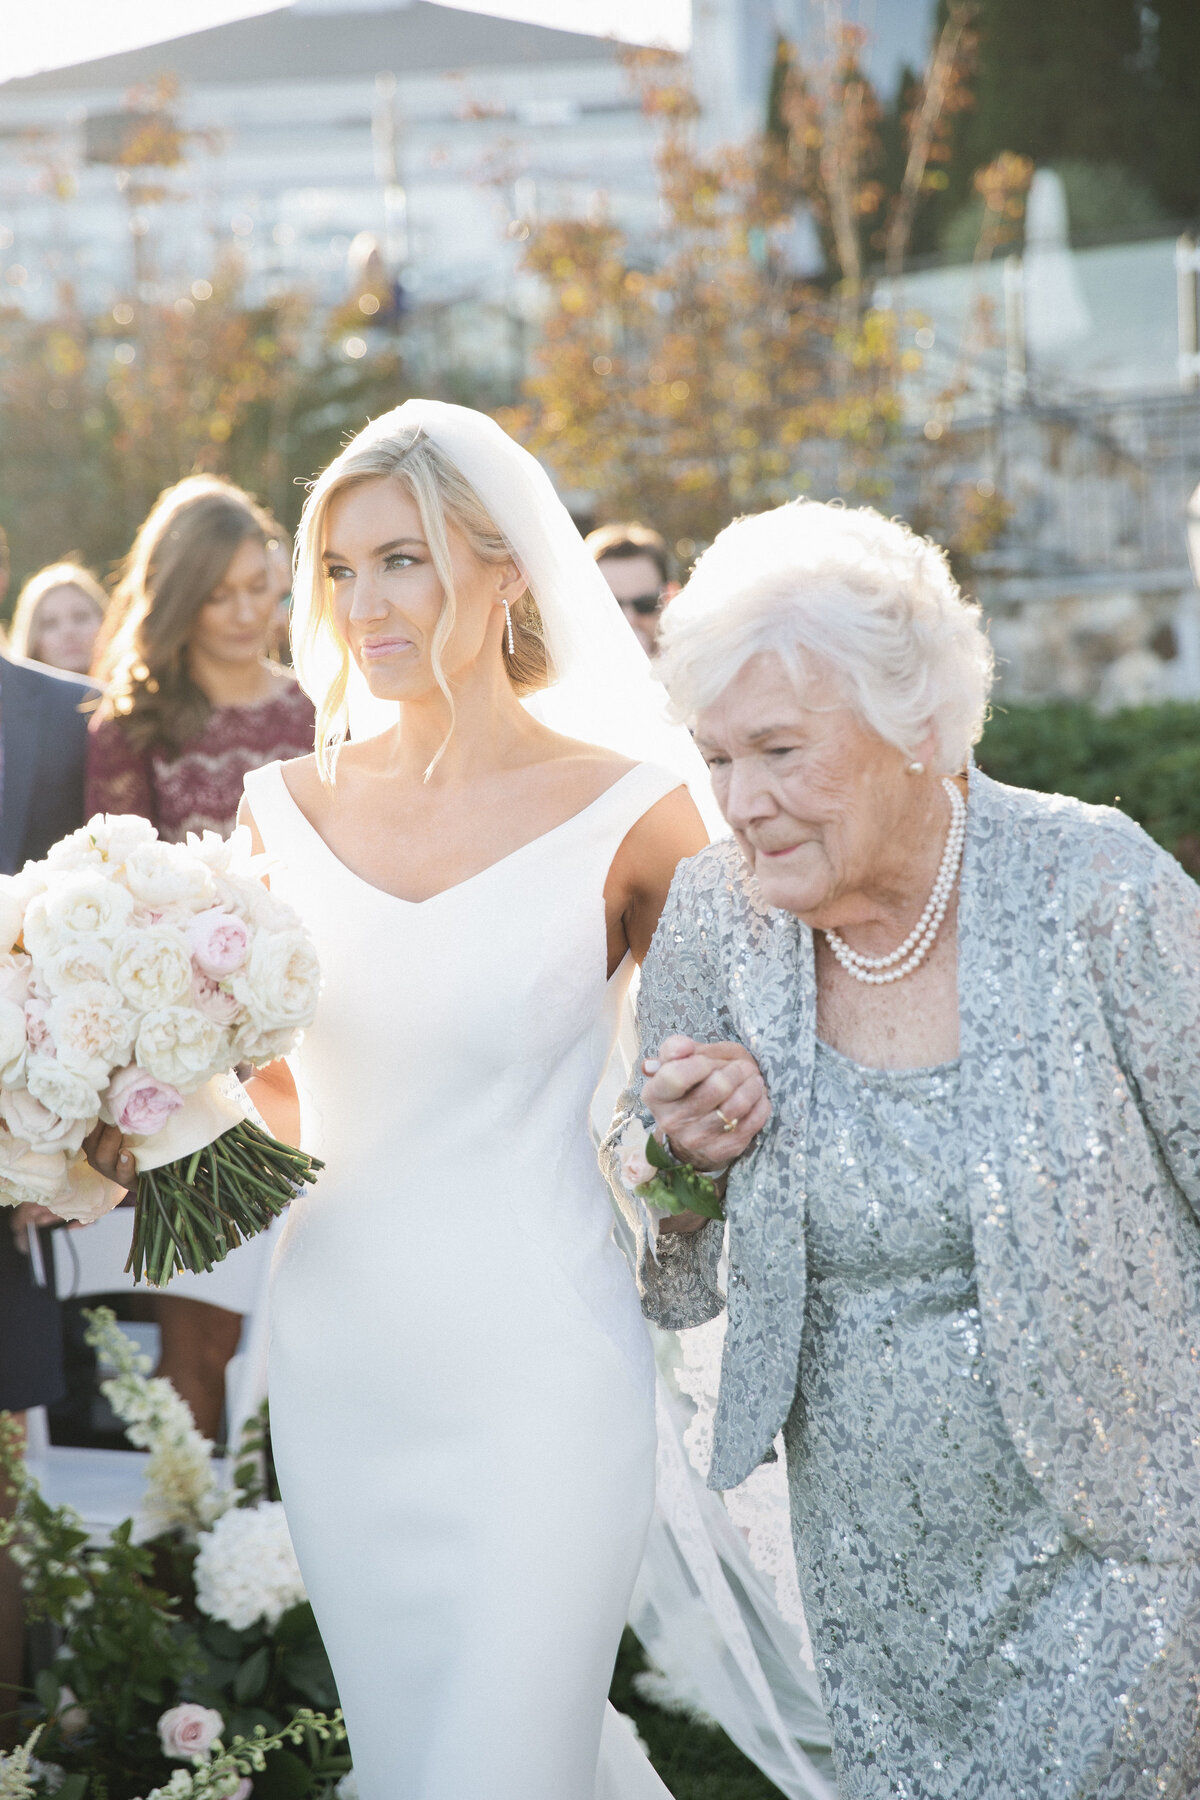 Whitney Bischoff and her Grandmother walking down the aisle together at Wequassett Resort